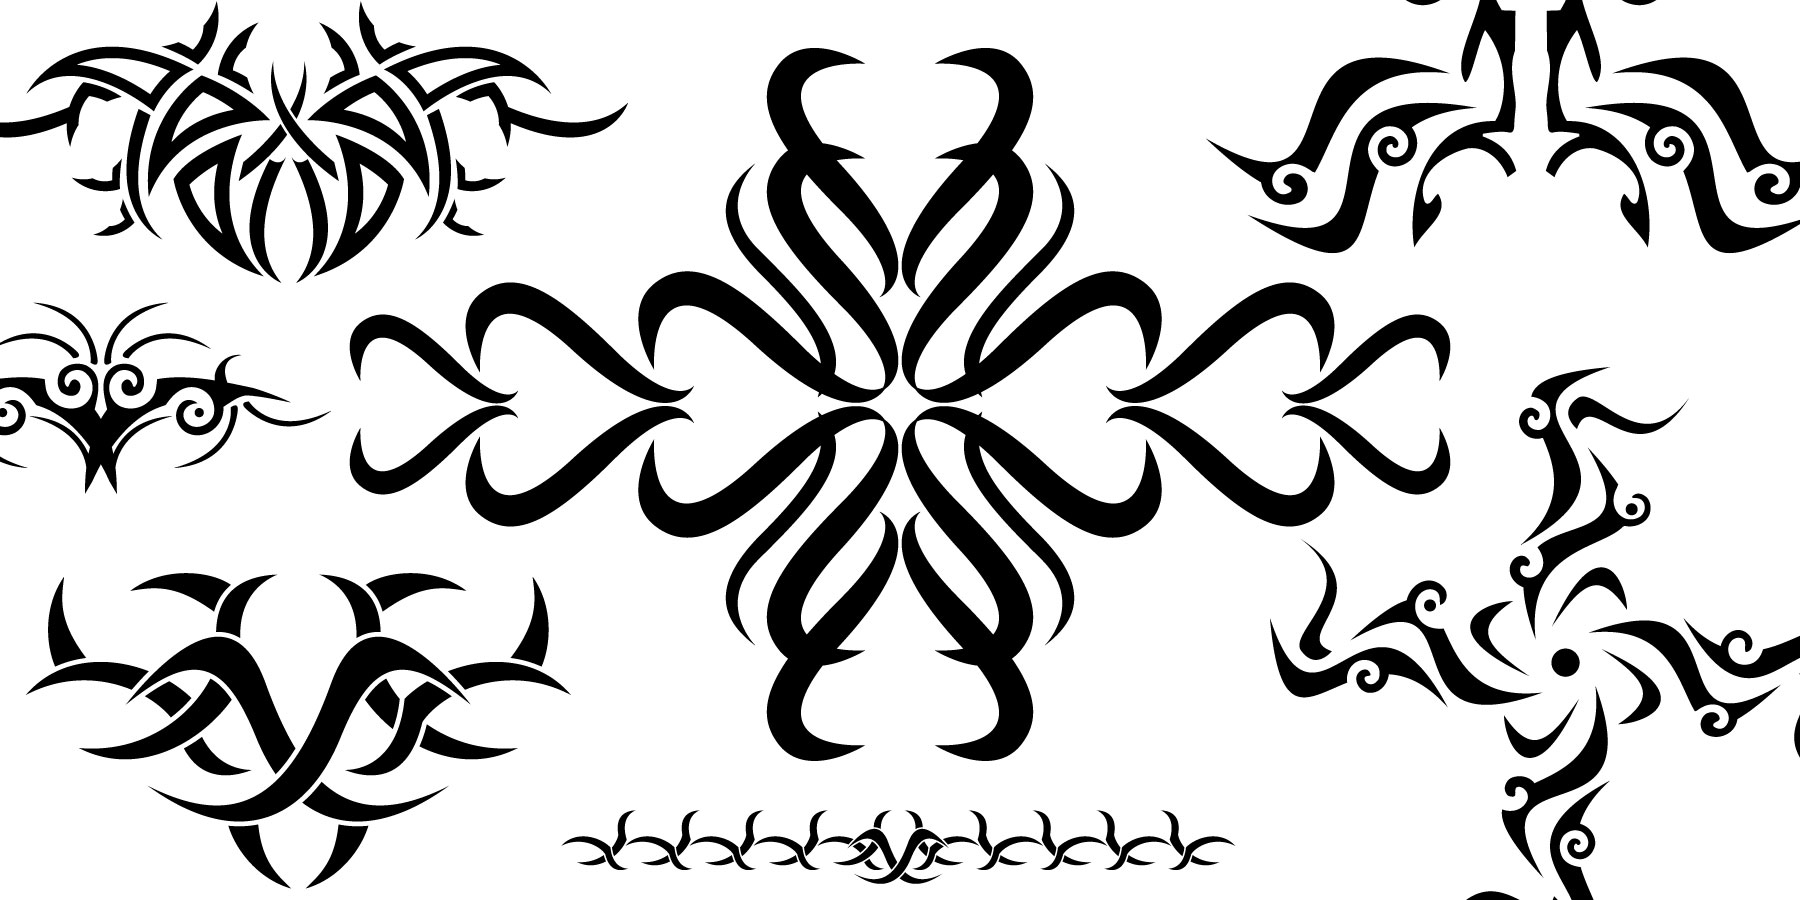 Download Free tribal tatto art - vector tribal tattoos samples | OpenGraphicDesign | free vectors ...